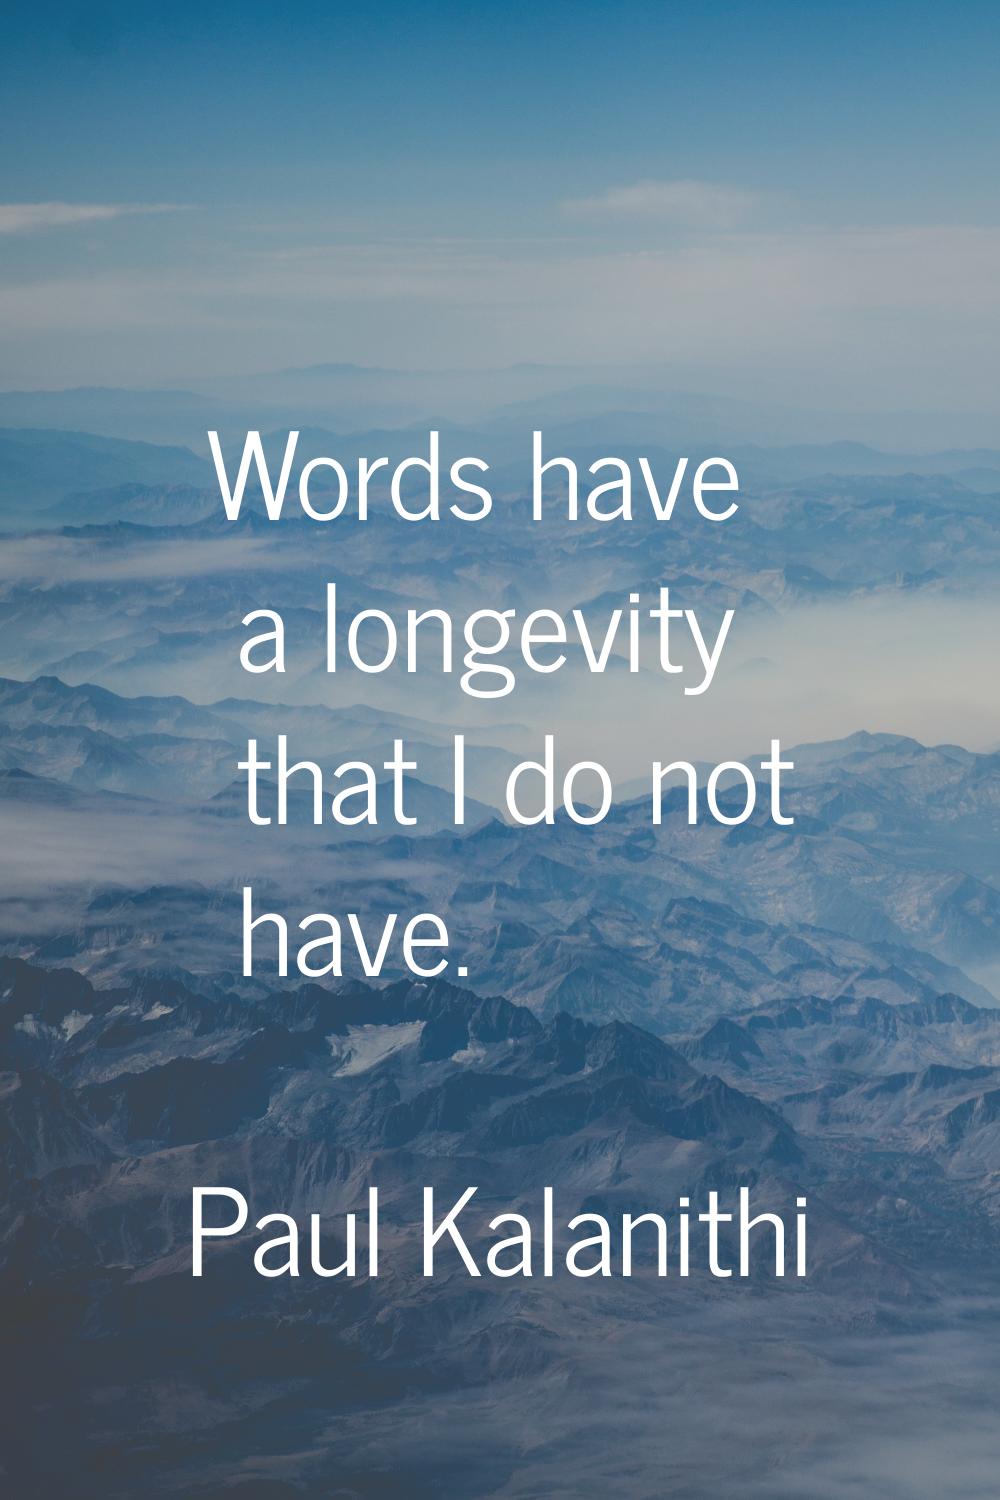 Words have a longevity that I do not have.